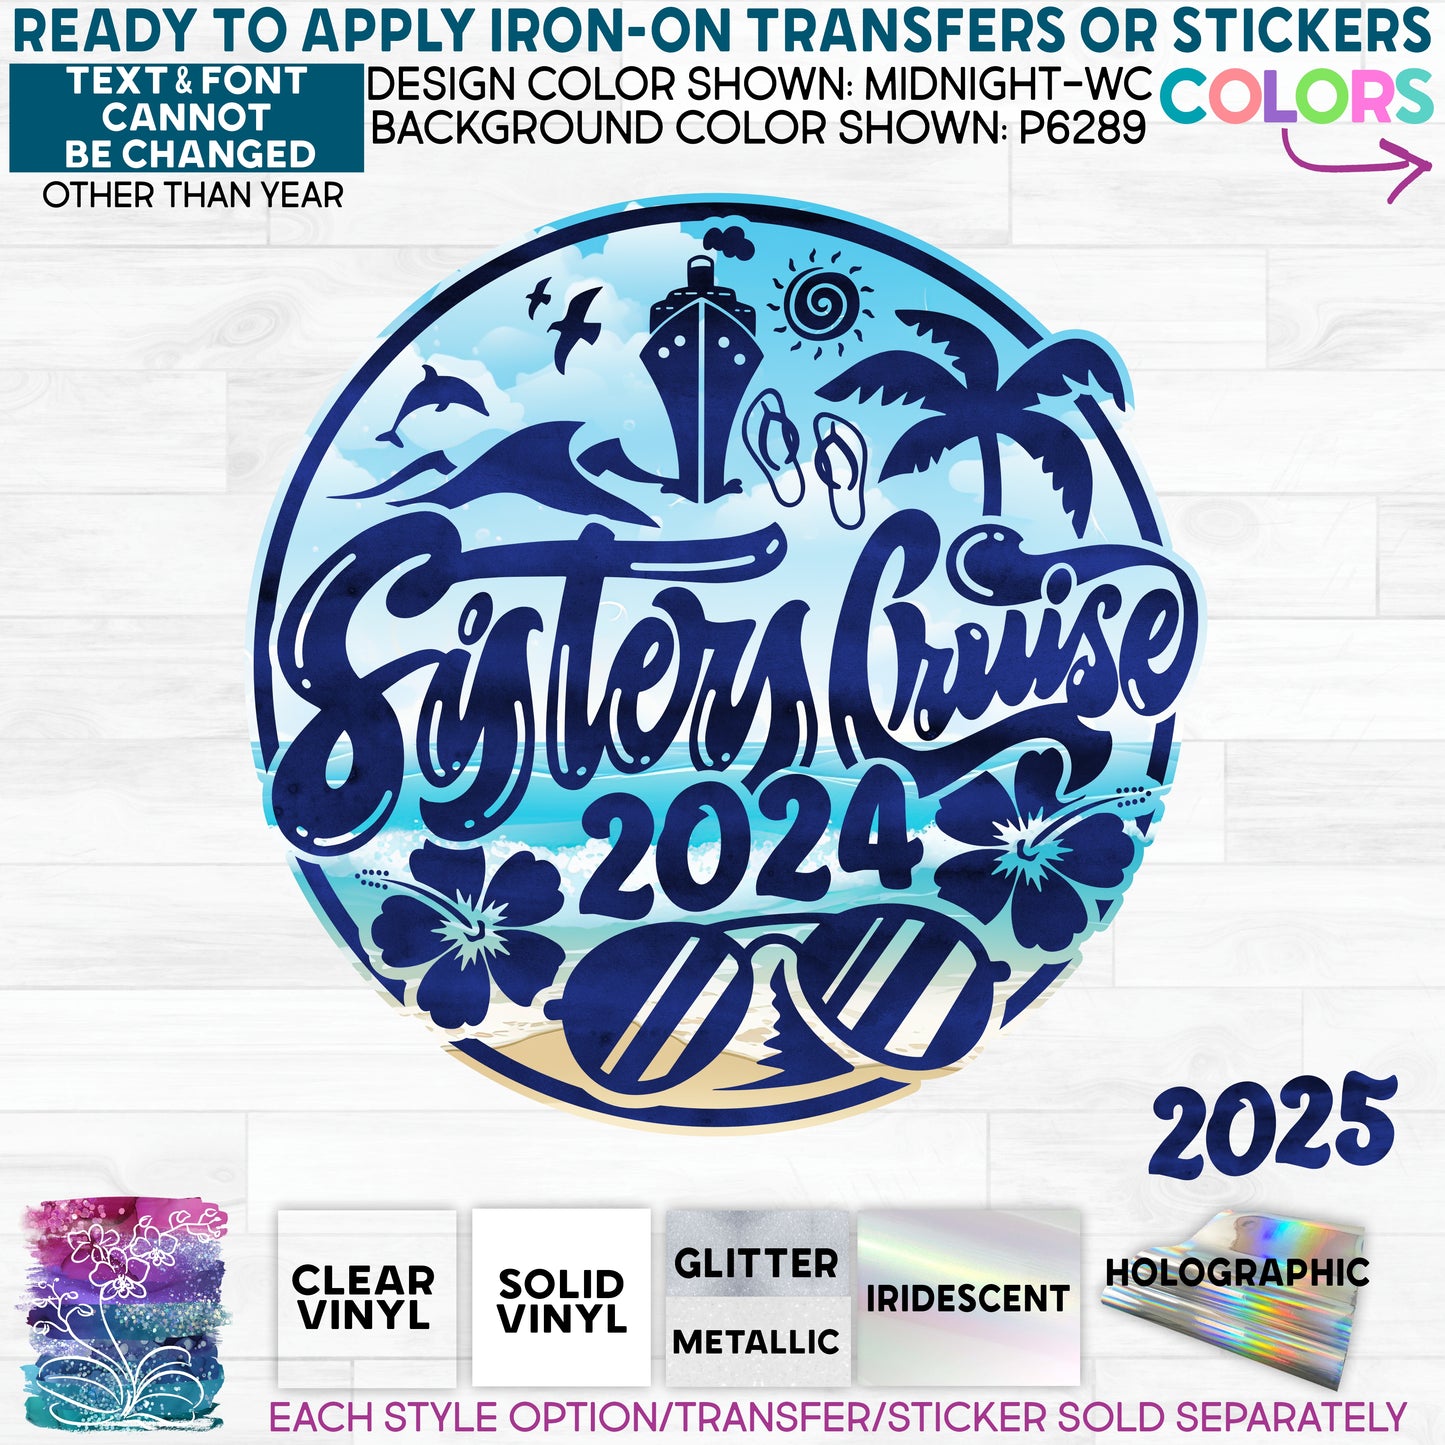 (s329-D) Sisters Cruise 2023 2024 2025 Any Year Glitter or Vinyl Iron-On Transfer or Sticker